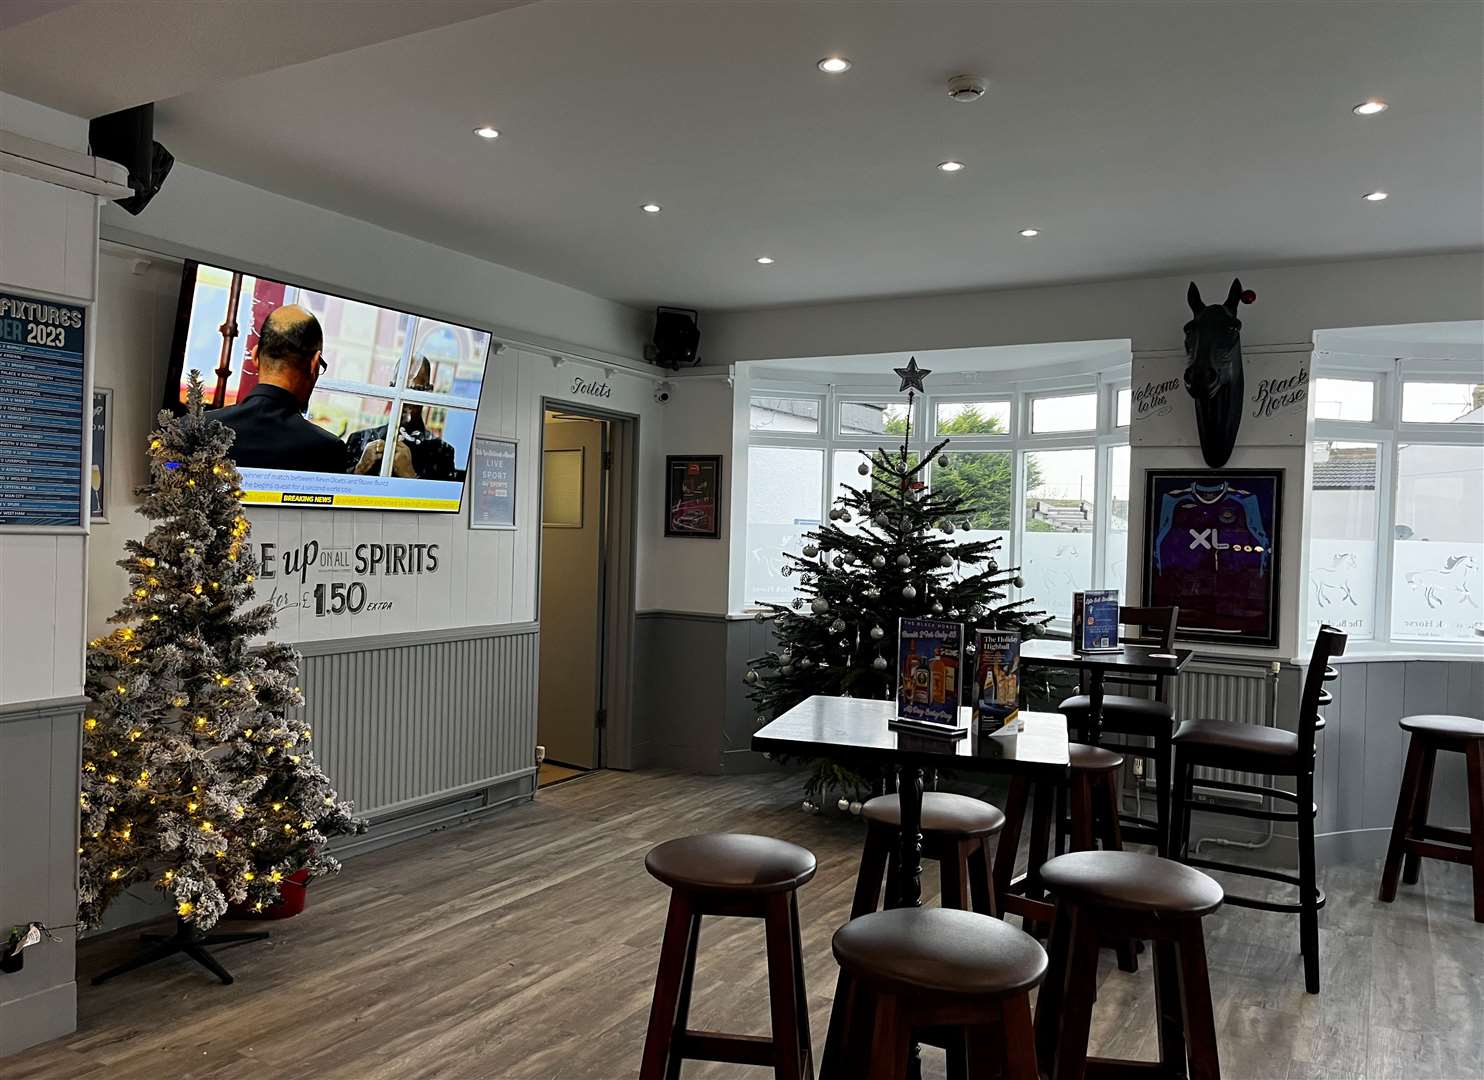 The Black Horse has been refurbished in time for Christmas